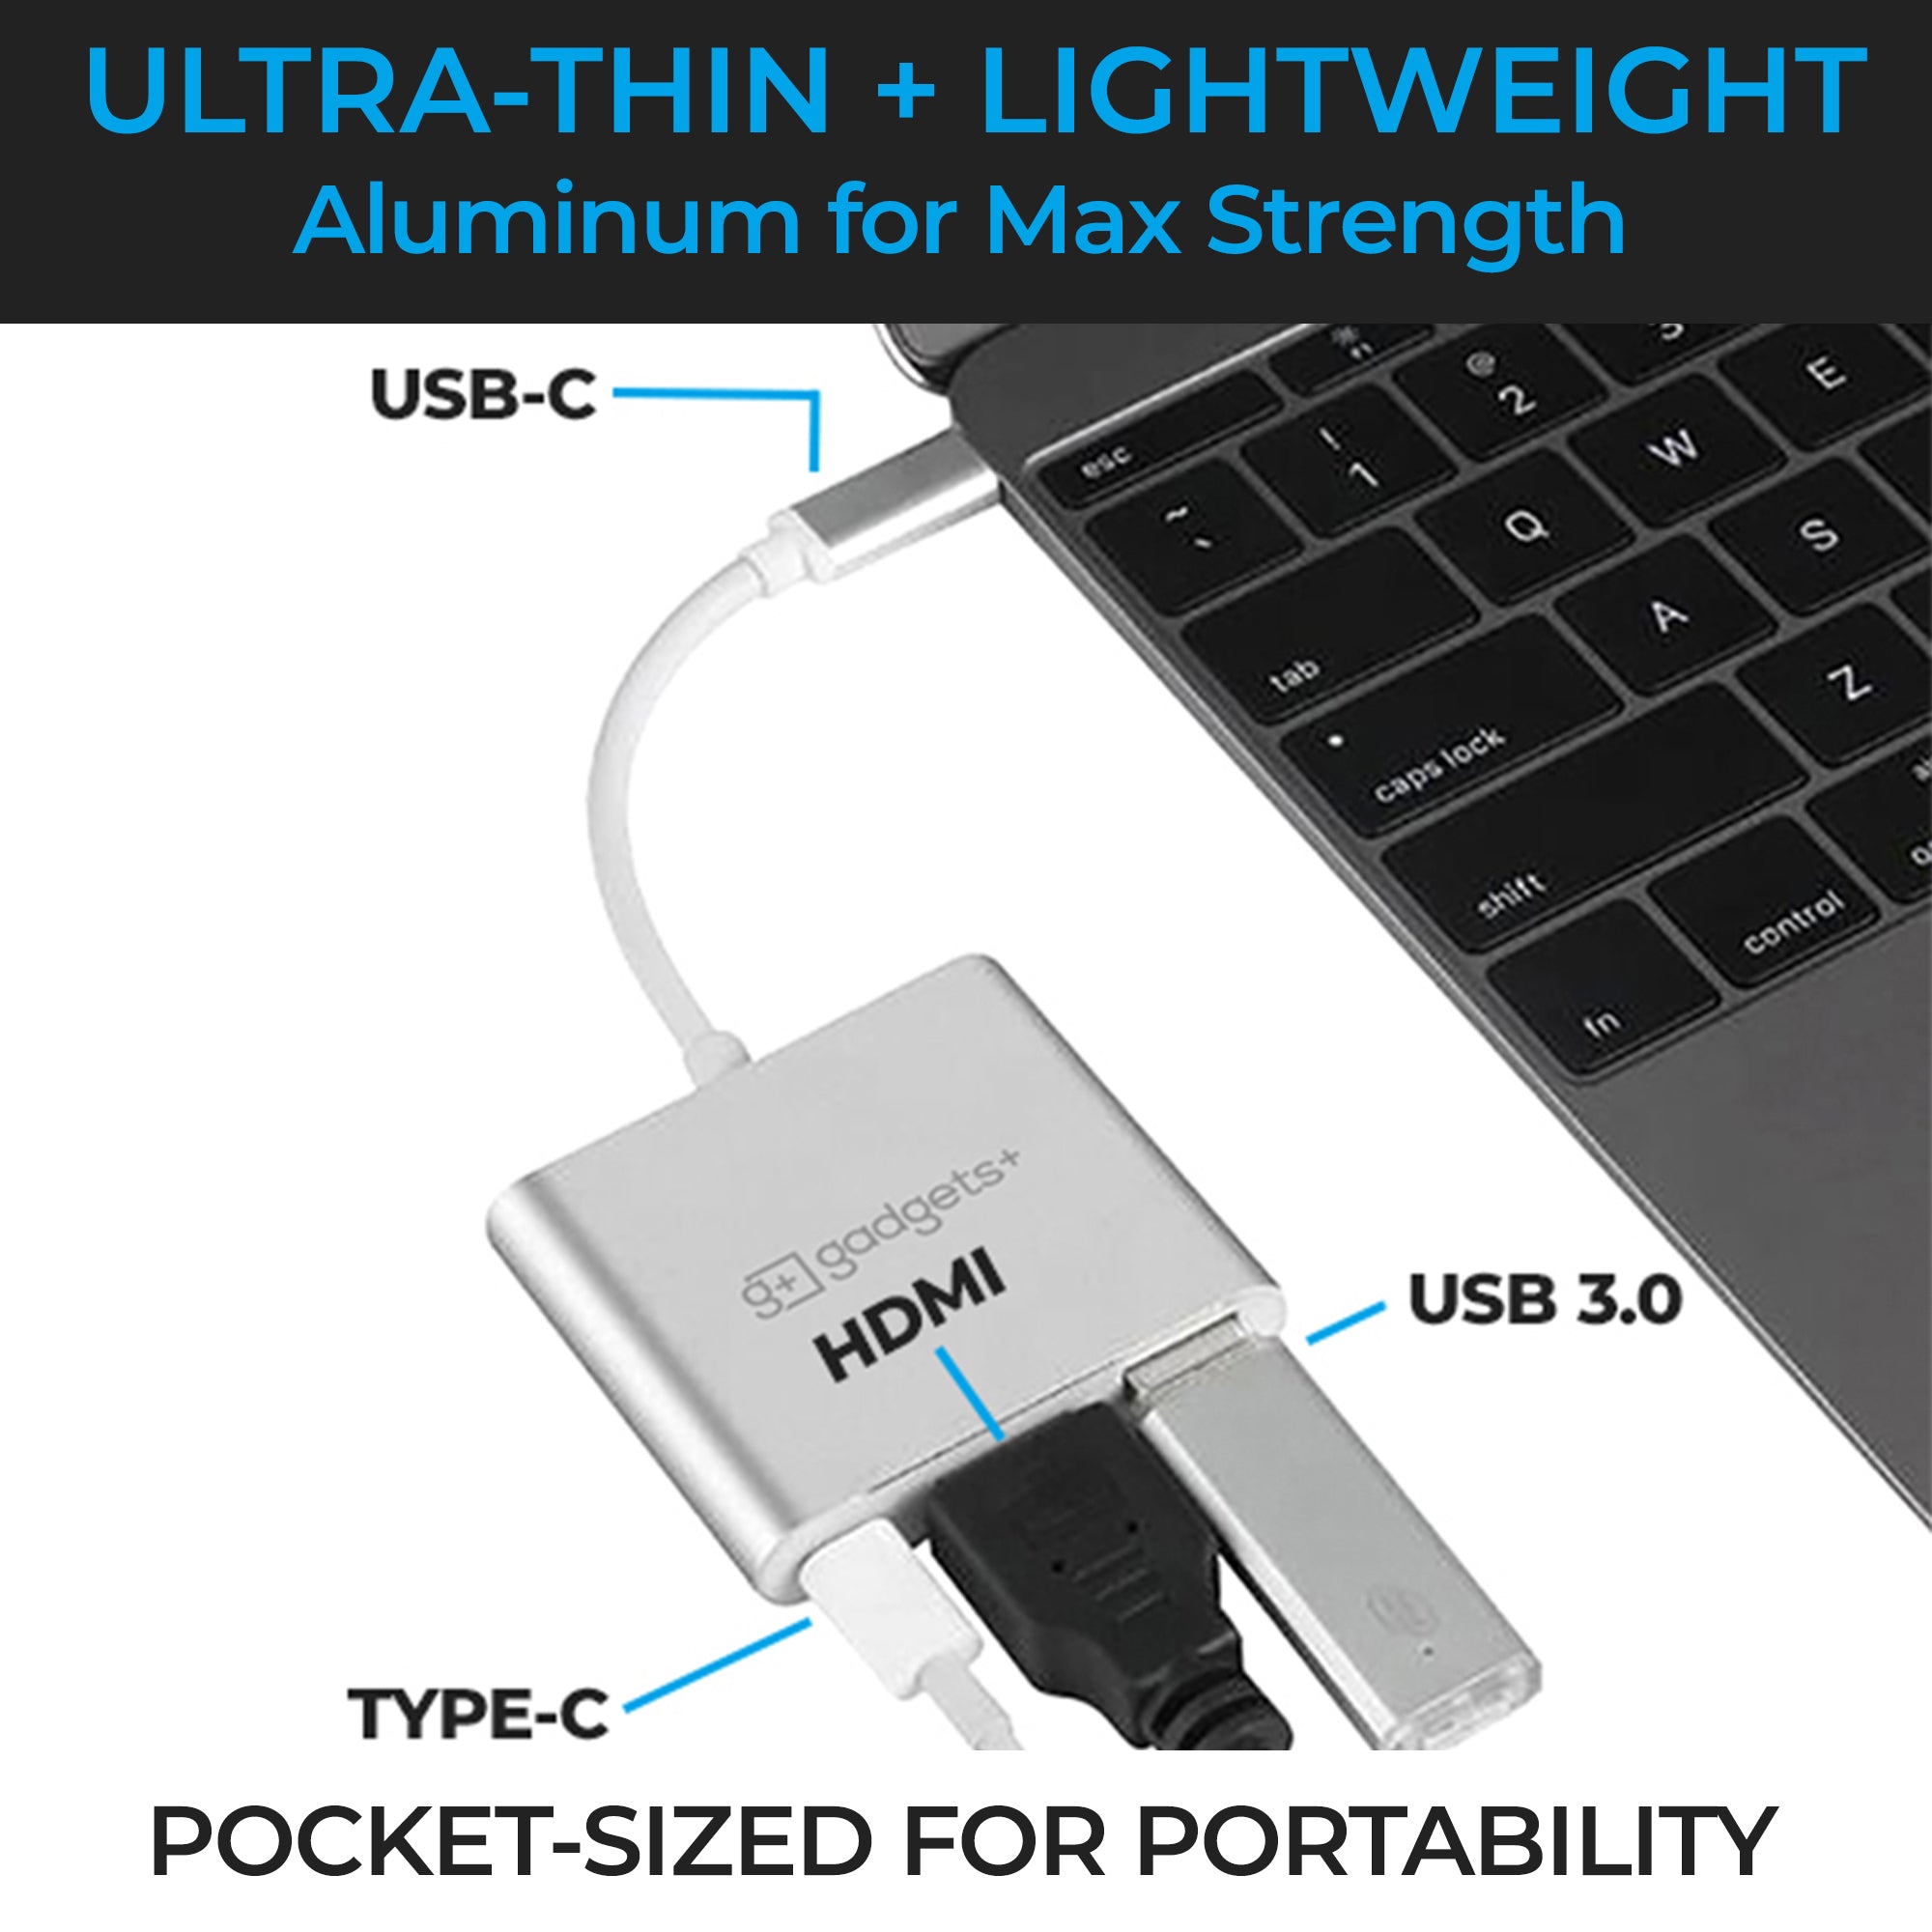 Ultra thin USB splitter has a port for a type-c cord, HDMI cord and USB 3.0. Compatible with many USB devices, such as keyboards, mice, flash drives and hard drives.